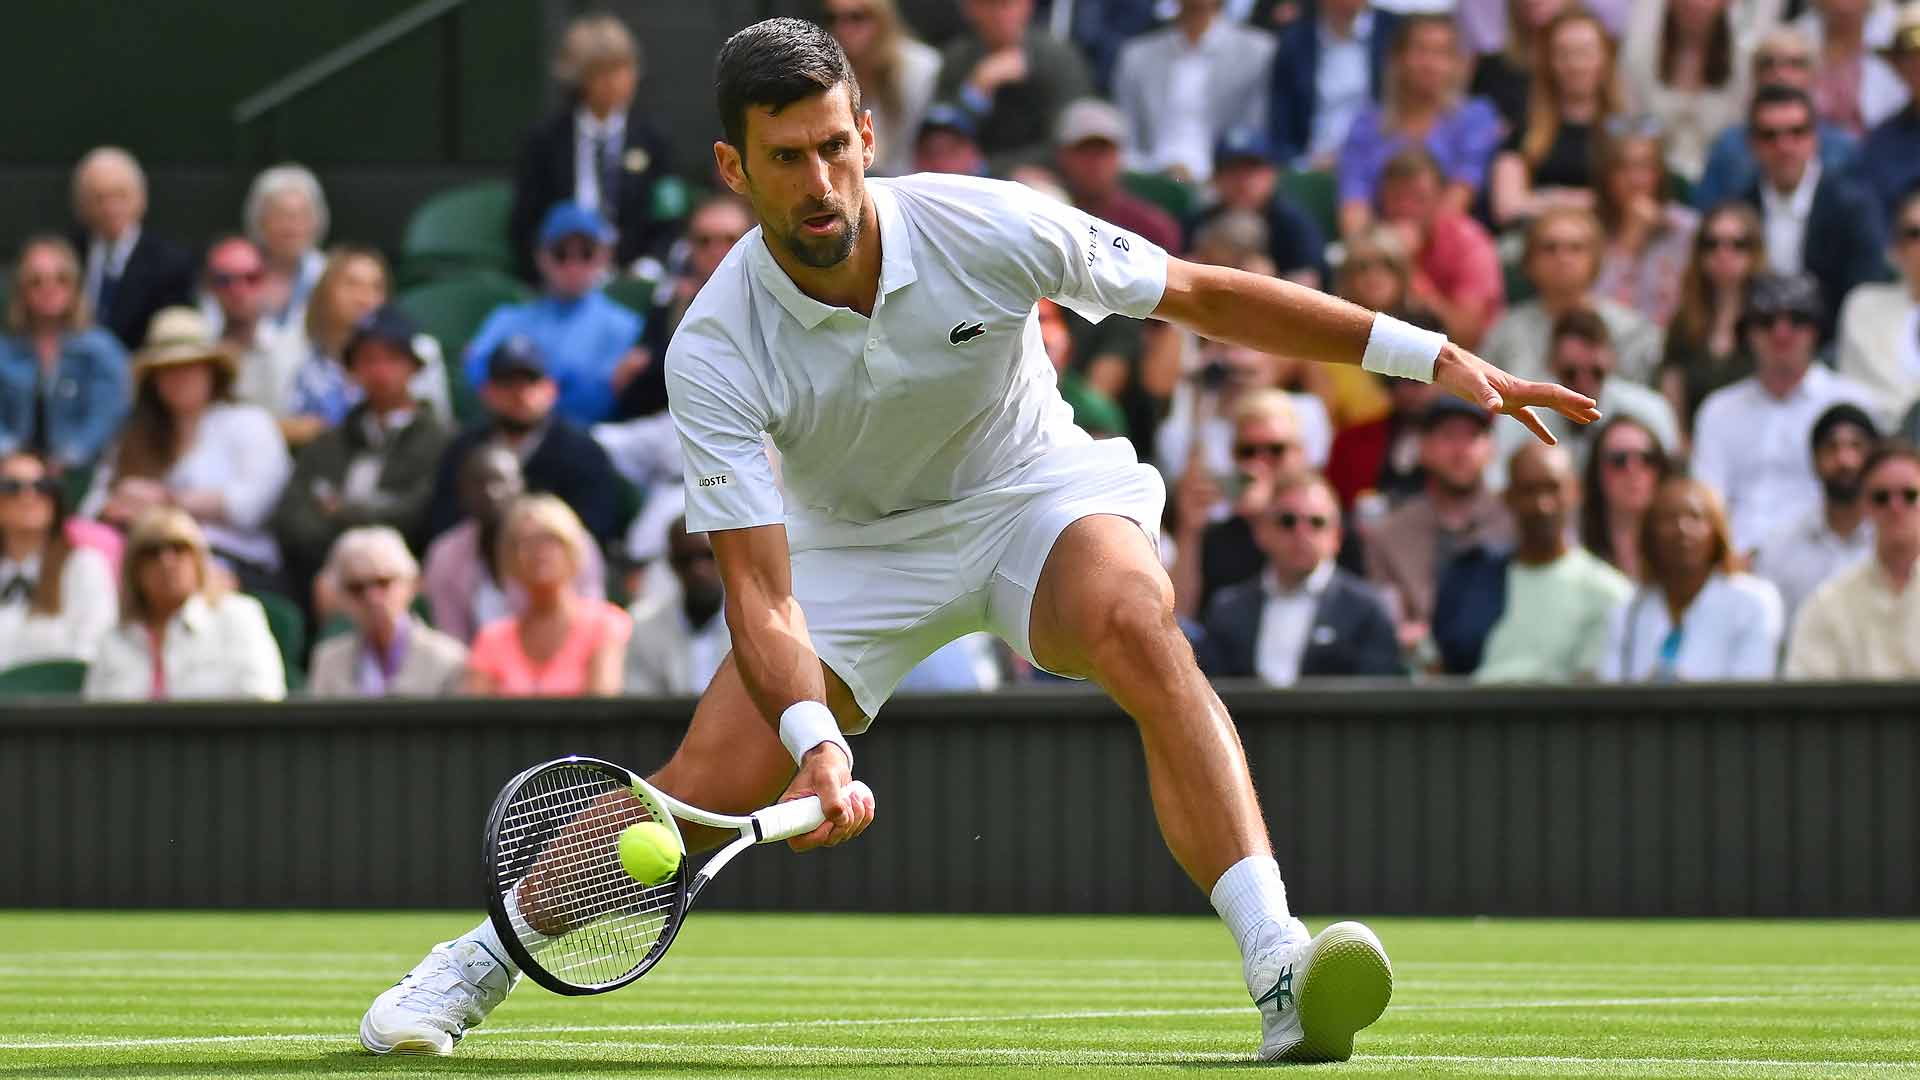 Wimbledon Schedule Wednesday Action Features Djokovic, Medvedev and More ATP Tour Tennis